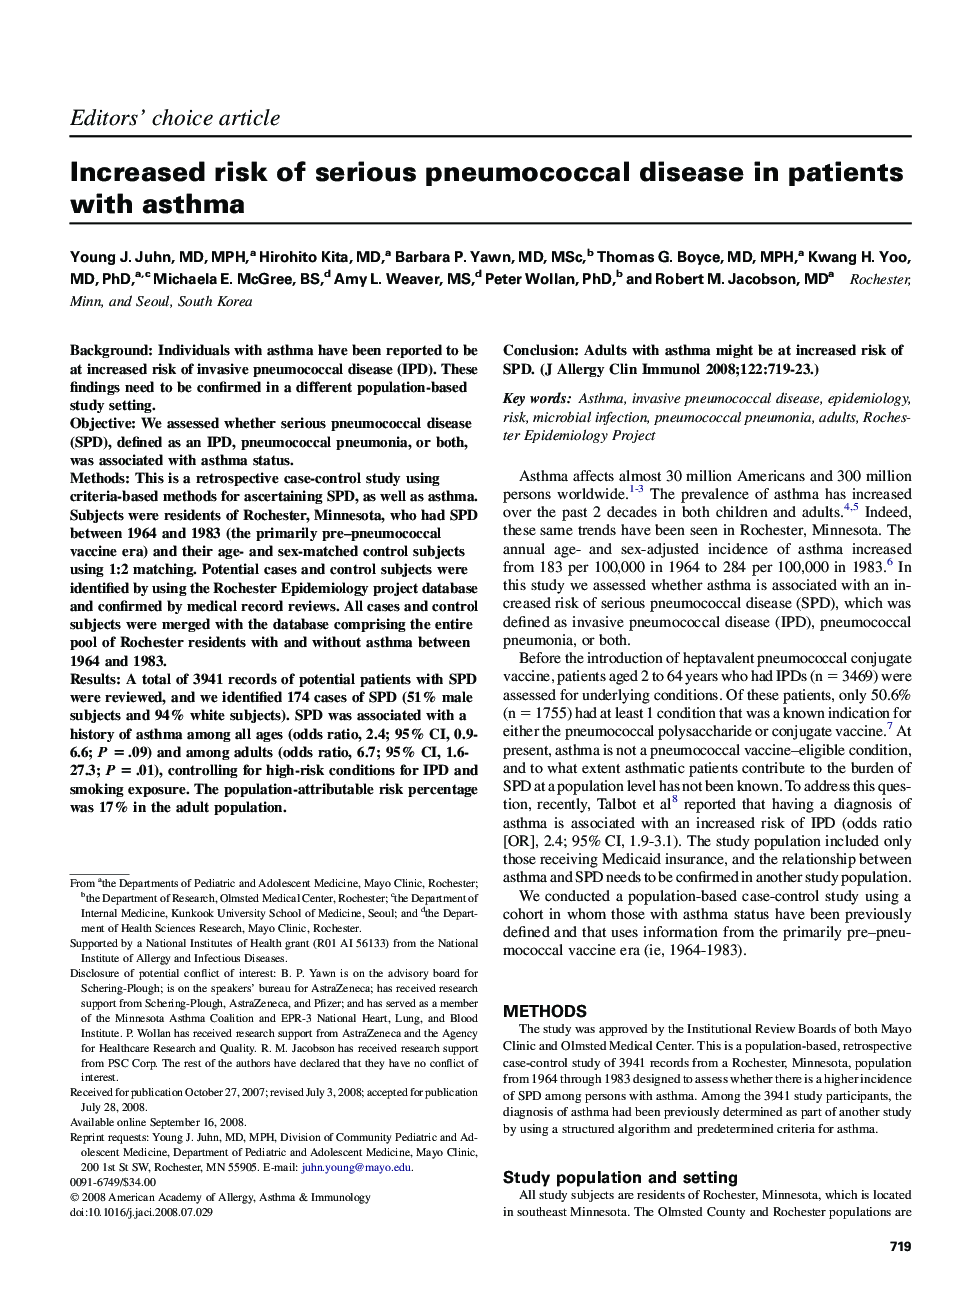 Increased risk of serious pneumococcal disease in patients with asthma 